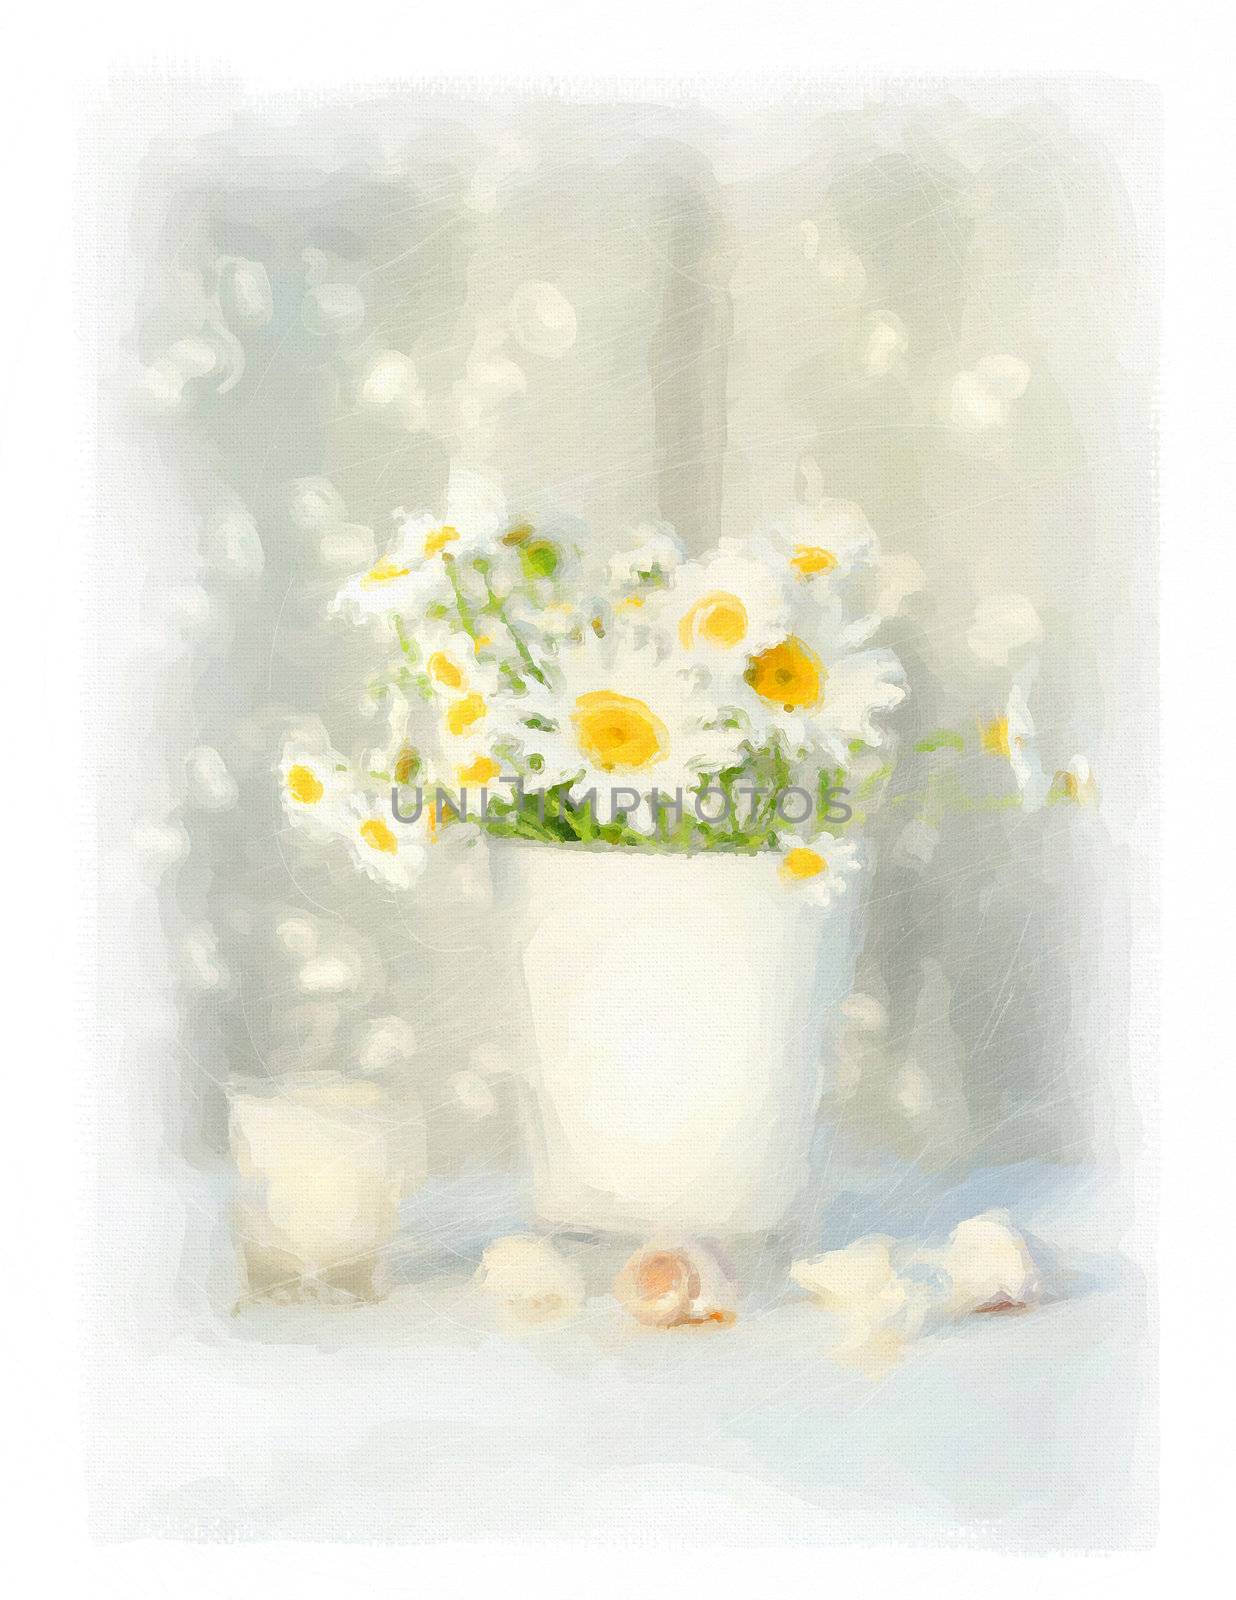 Digital watercolor of white daisies and seashells with white lace